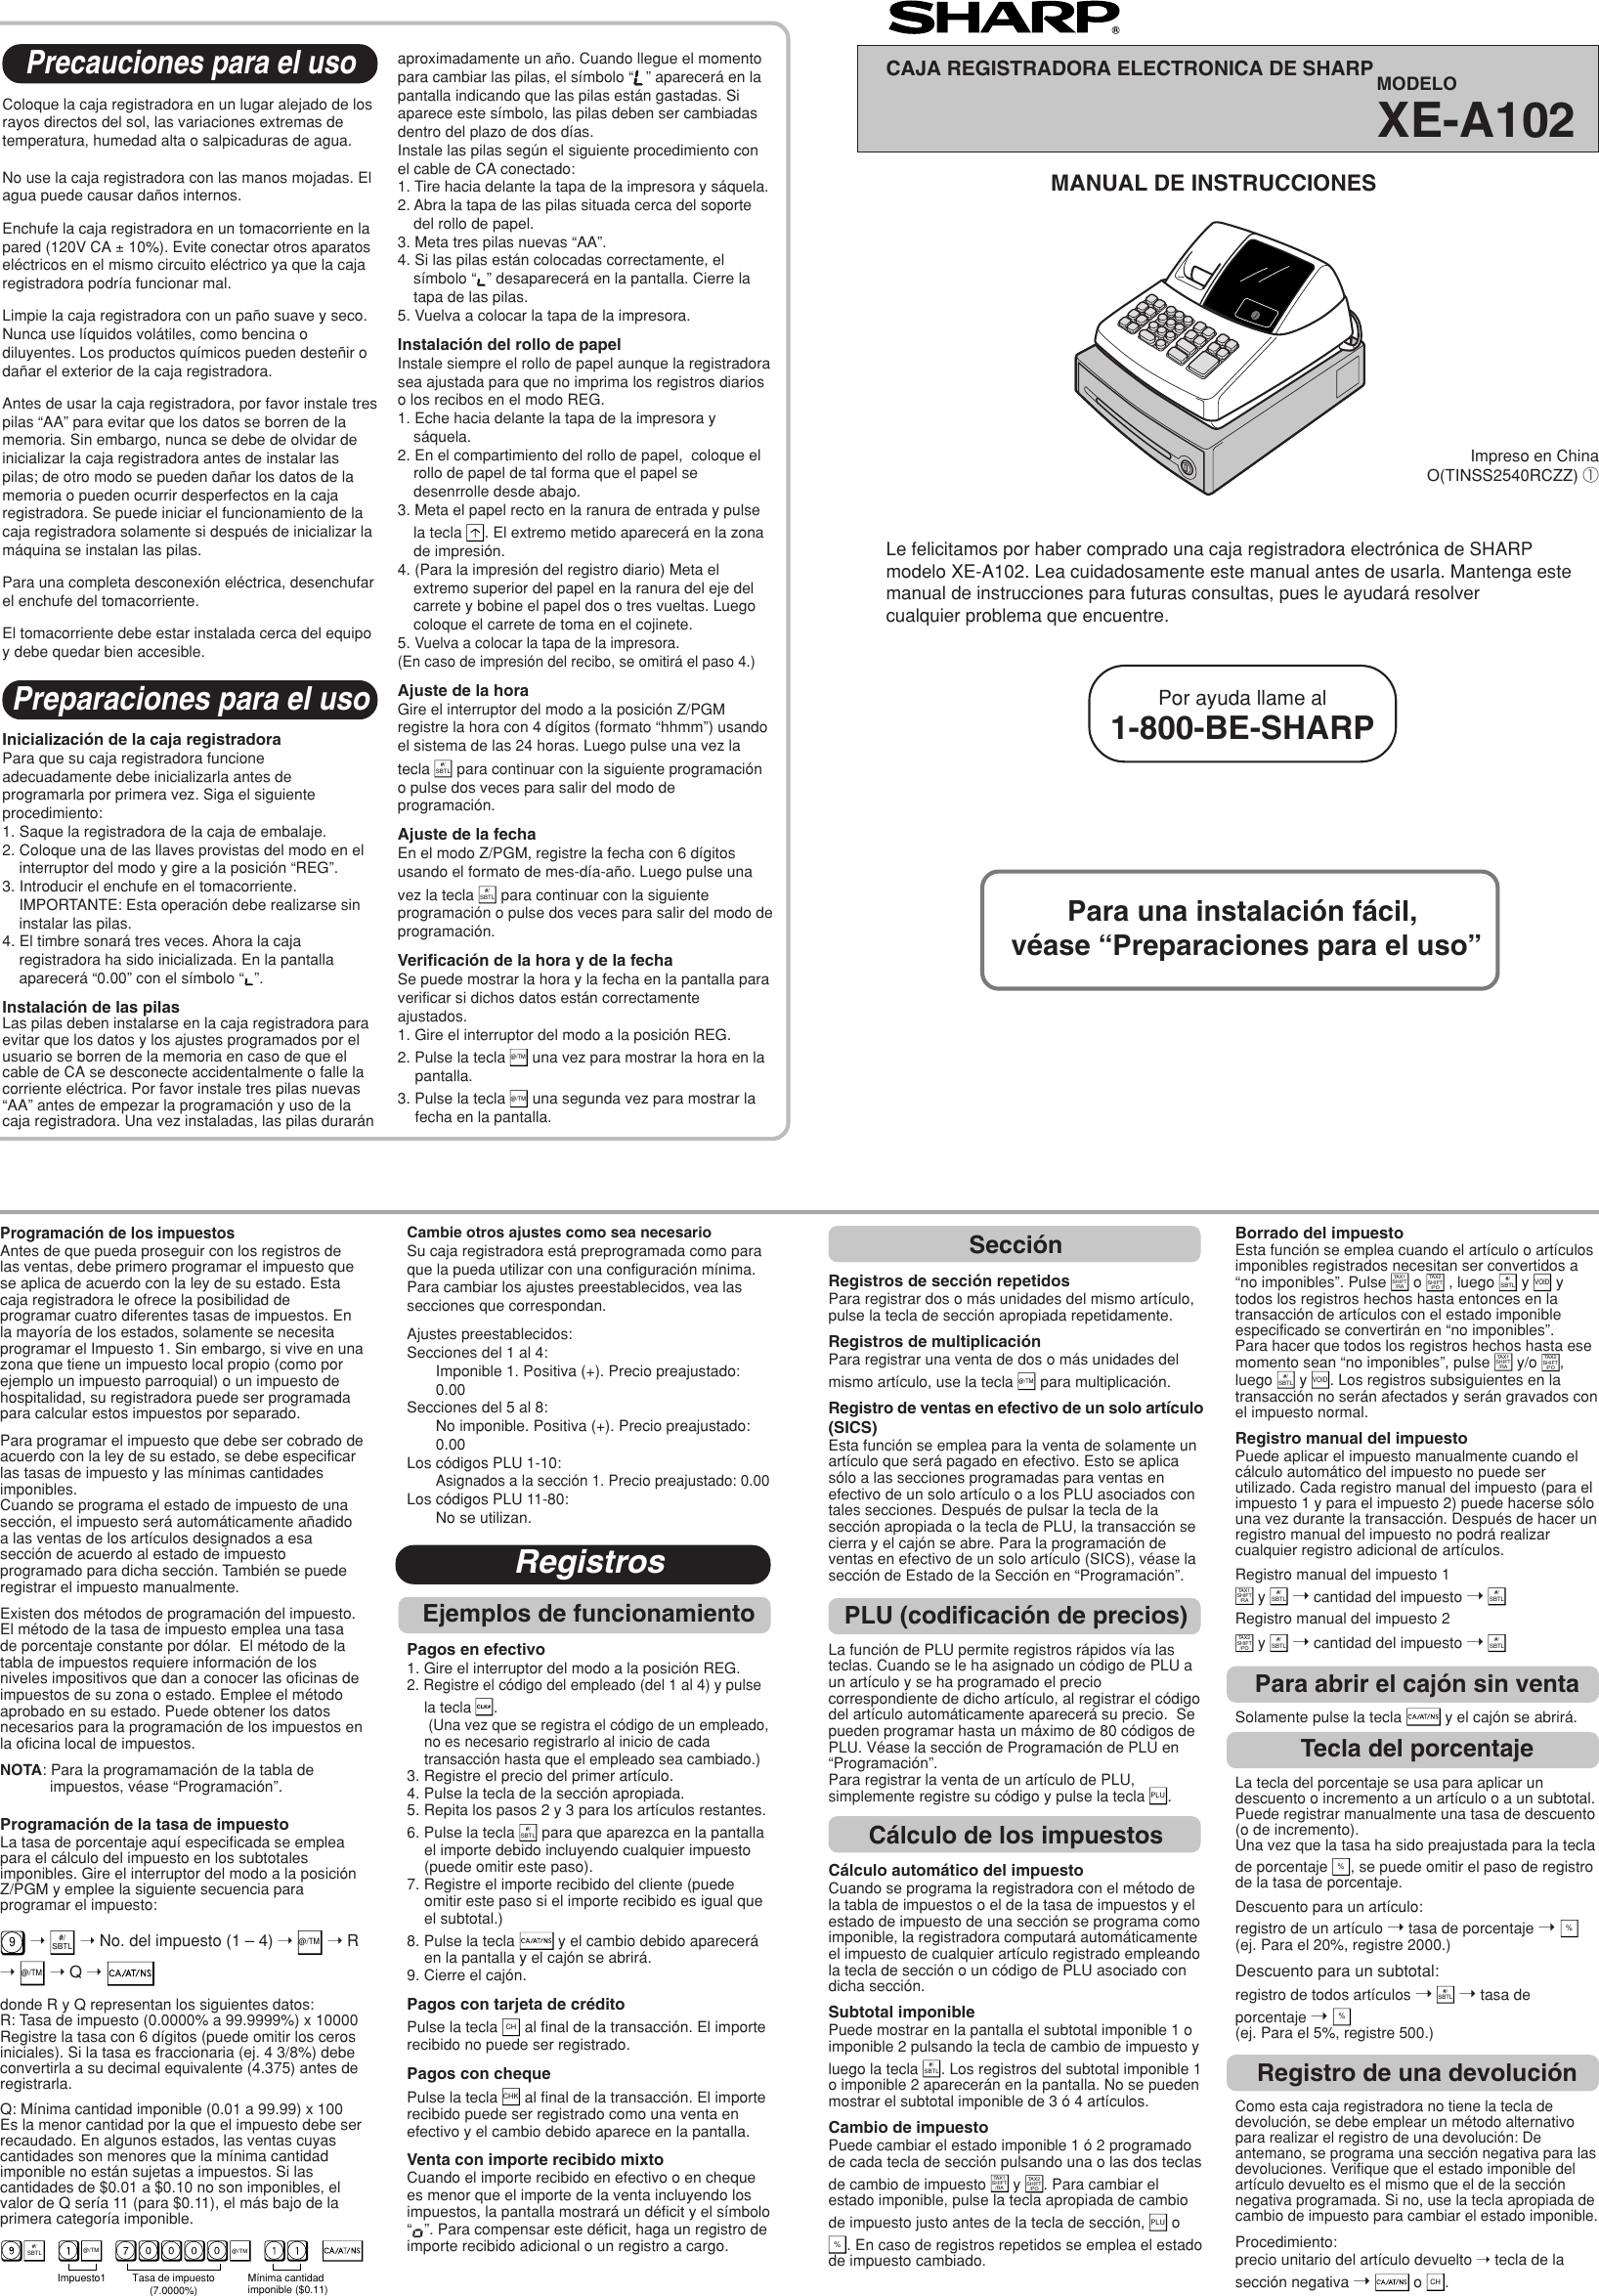 Page 5 of 6 - Sharp Sharp-Xe-A102-Owners-Manual- XE-A102 Operation Manual  Sharp-xe-a102-owners-manual